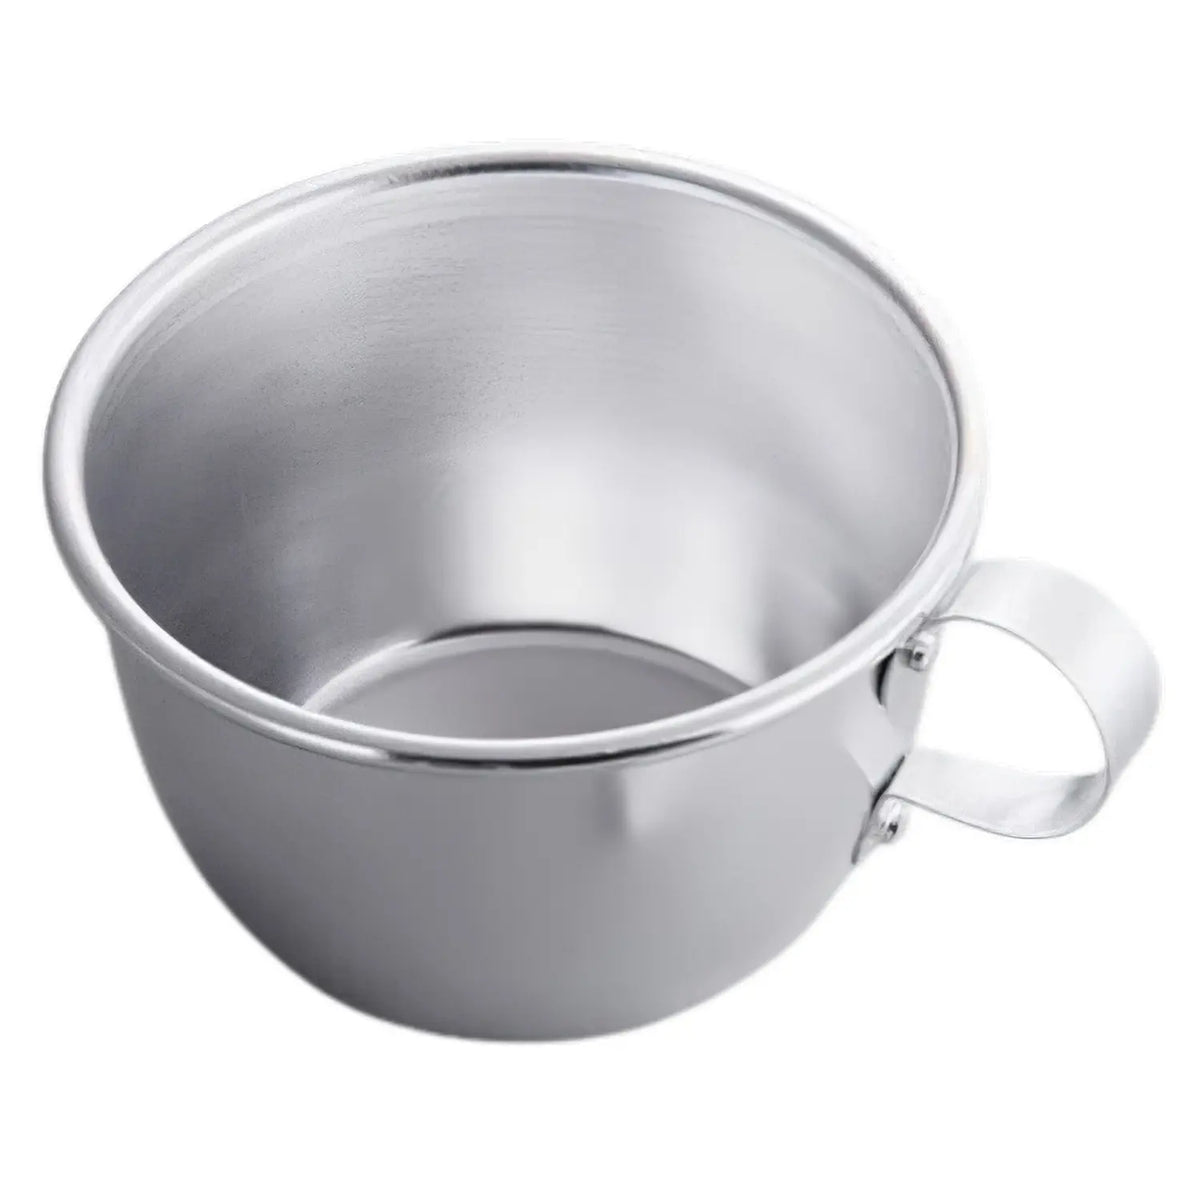 Ooi Metals Silver Anodized Aluminium Cup with Handle